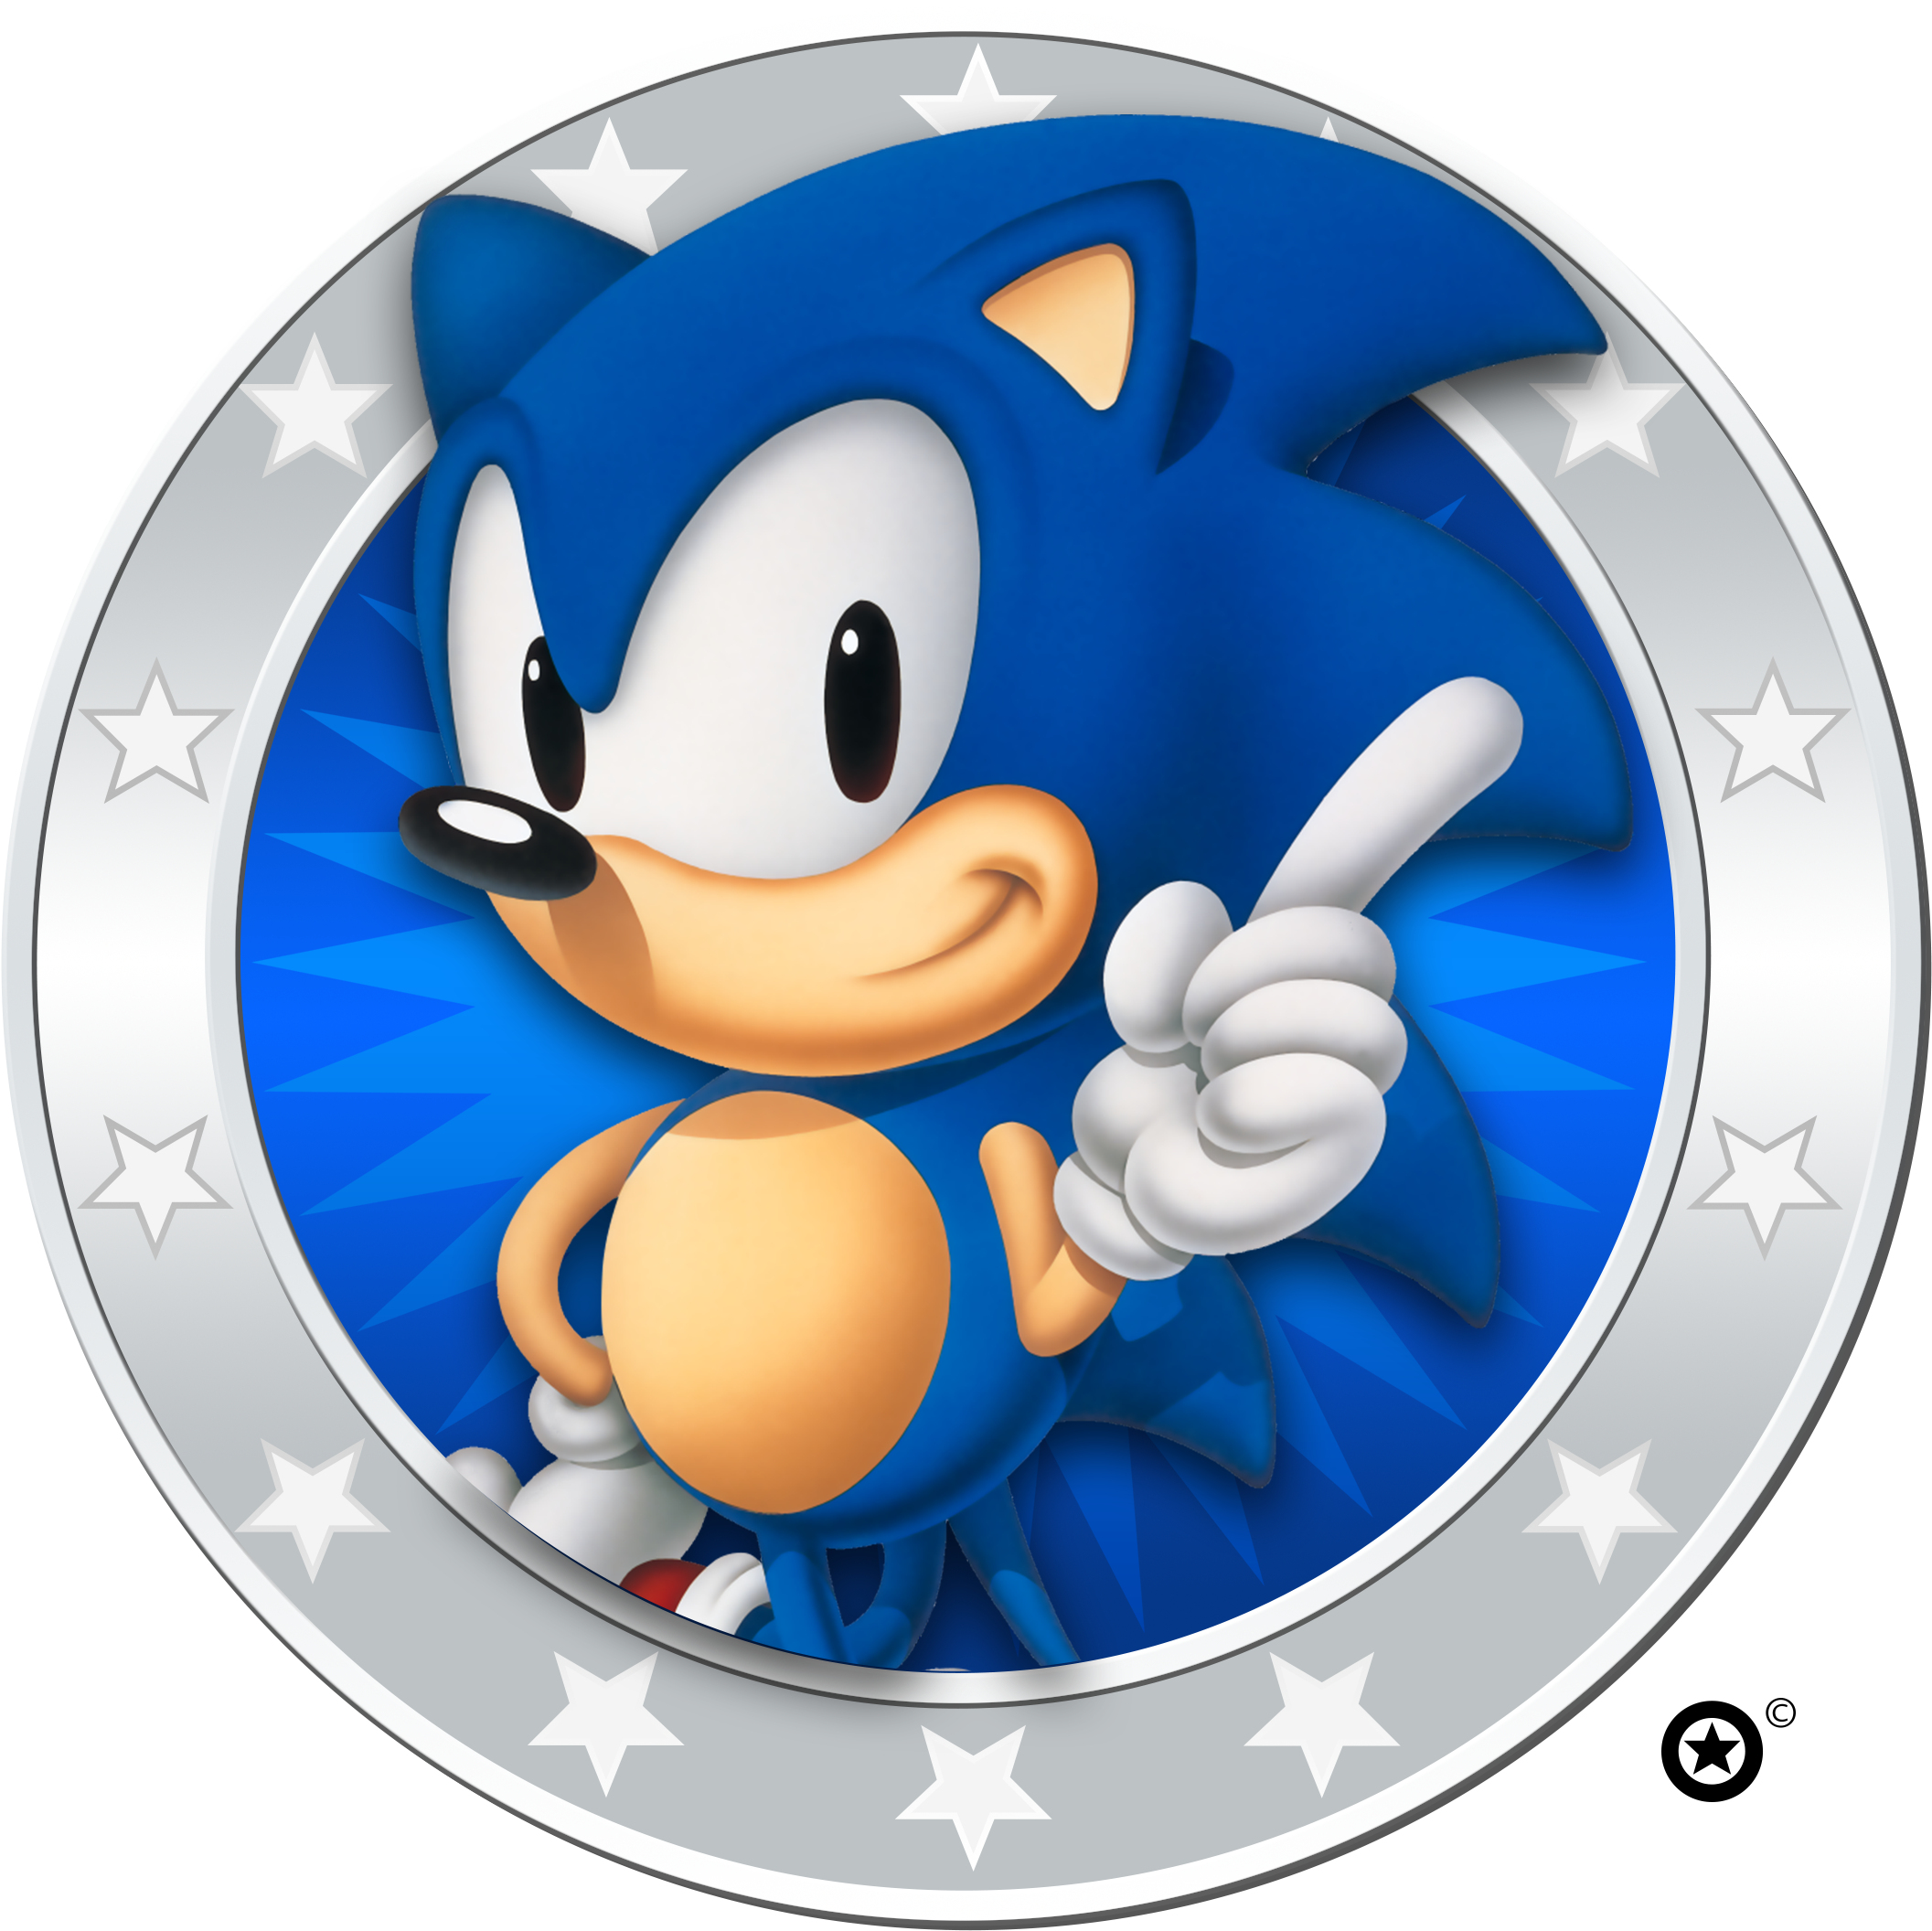 Sonic The Hedgehog Icon - Sonic The Hedgehog Iphone 6 Plus Case (face) (3240x2274)